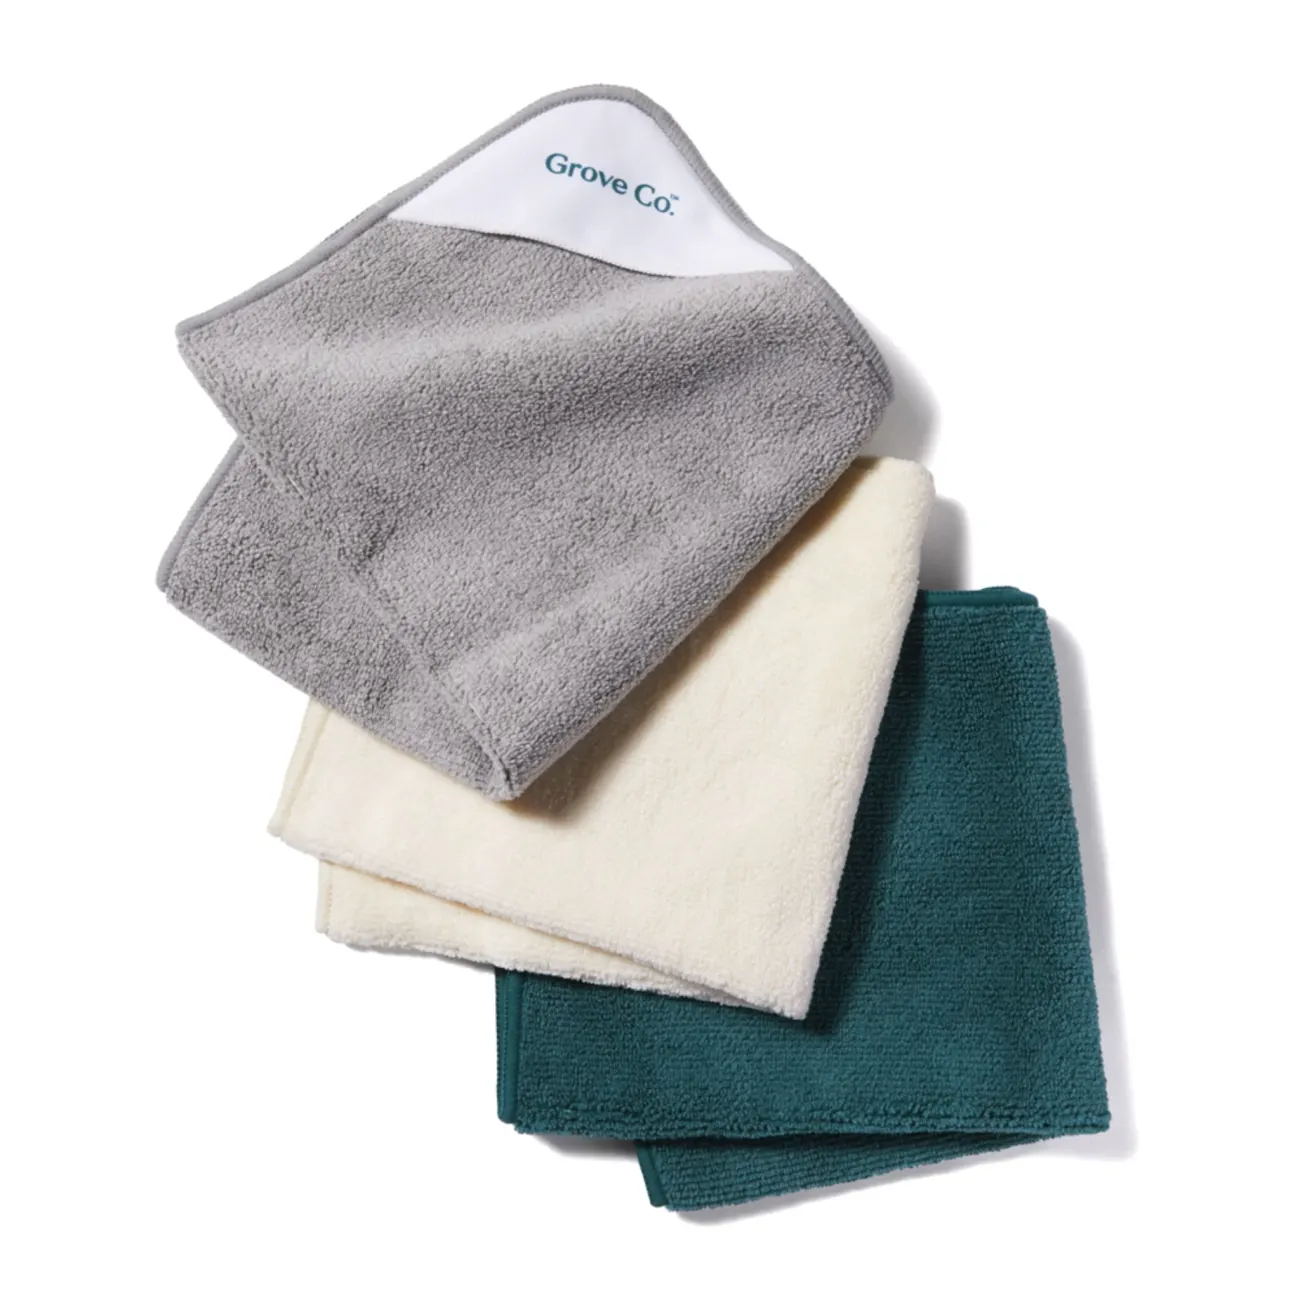 Grove Co. Microfiber Cleaning Cloths (Set of 3) are made to last 3 years. 